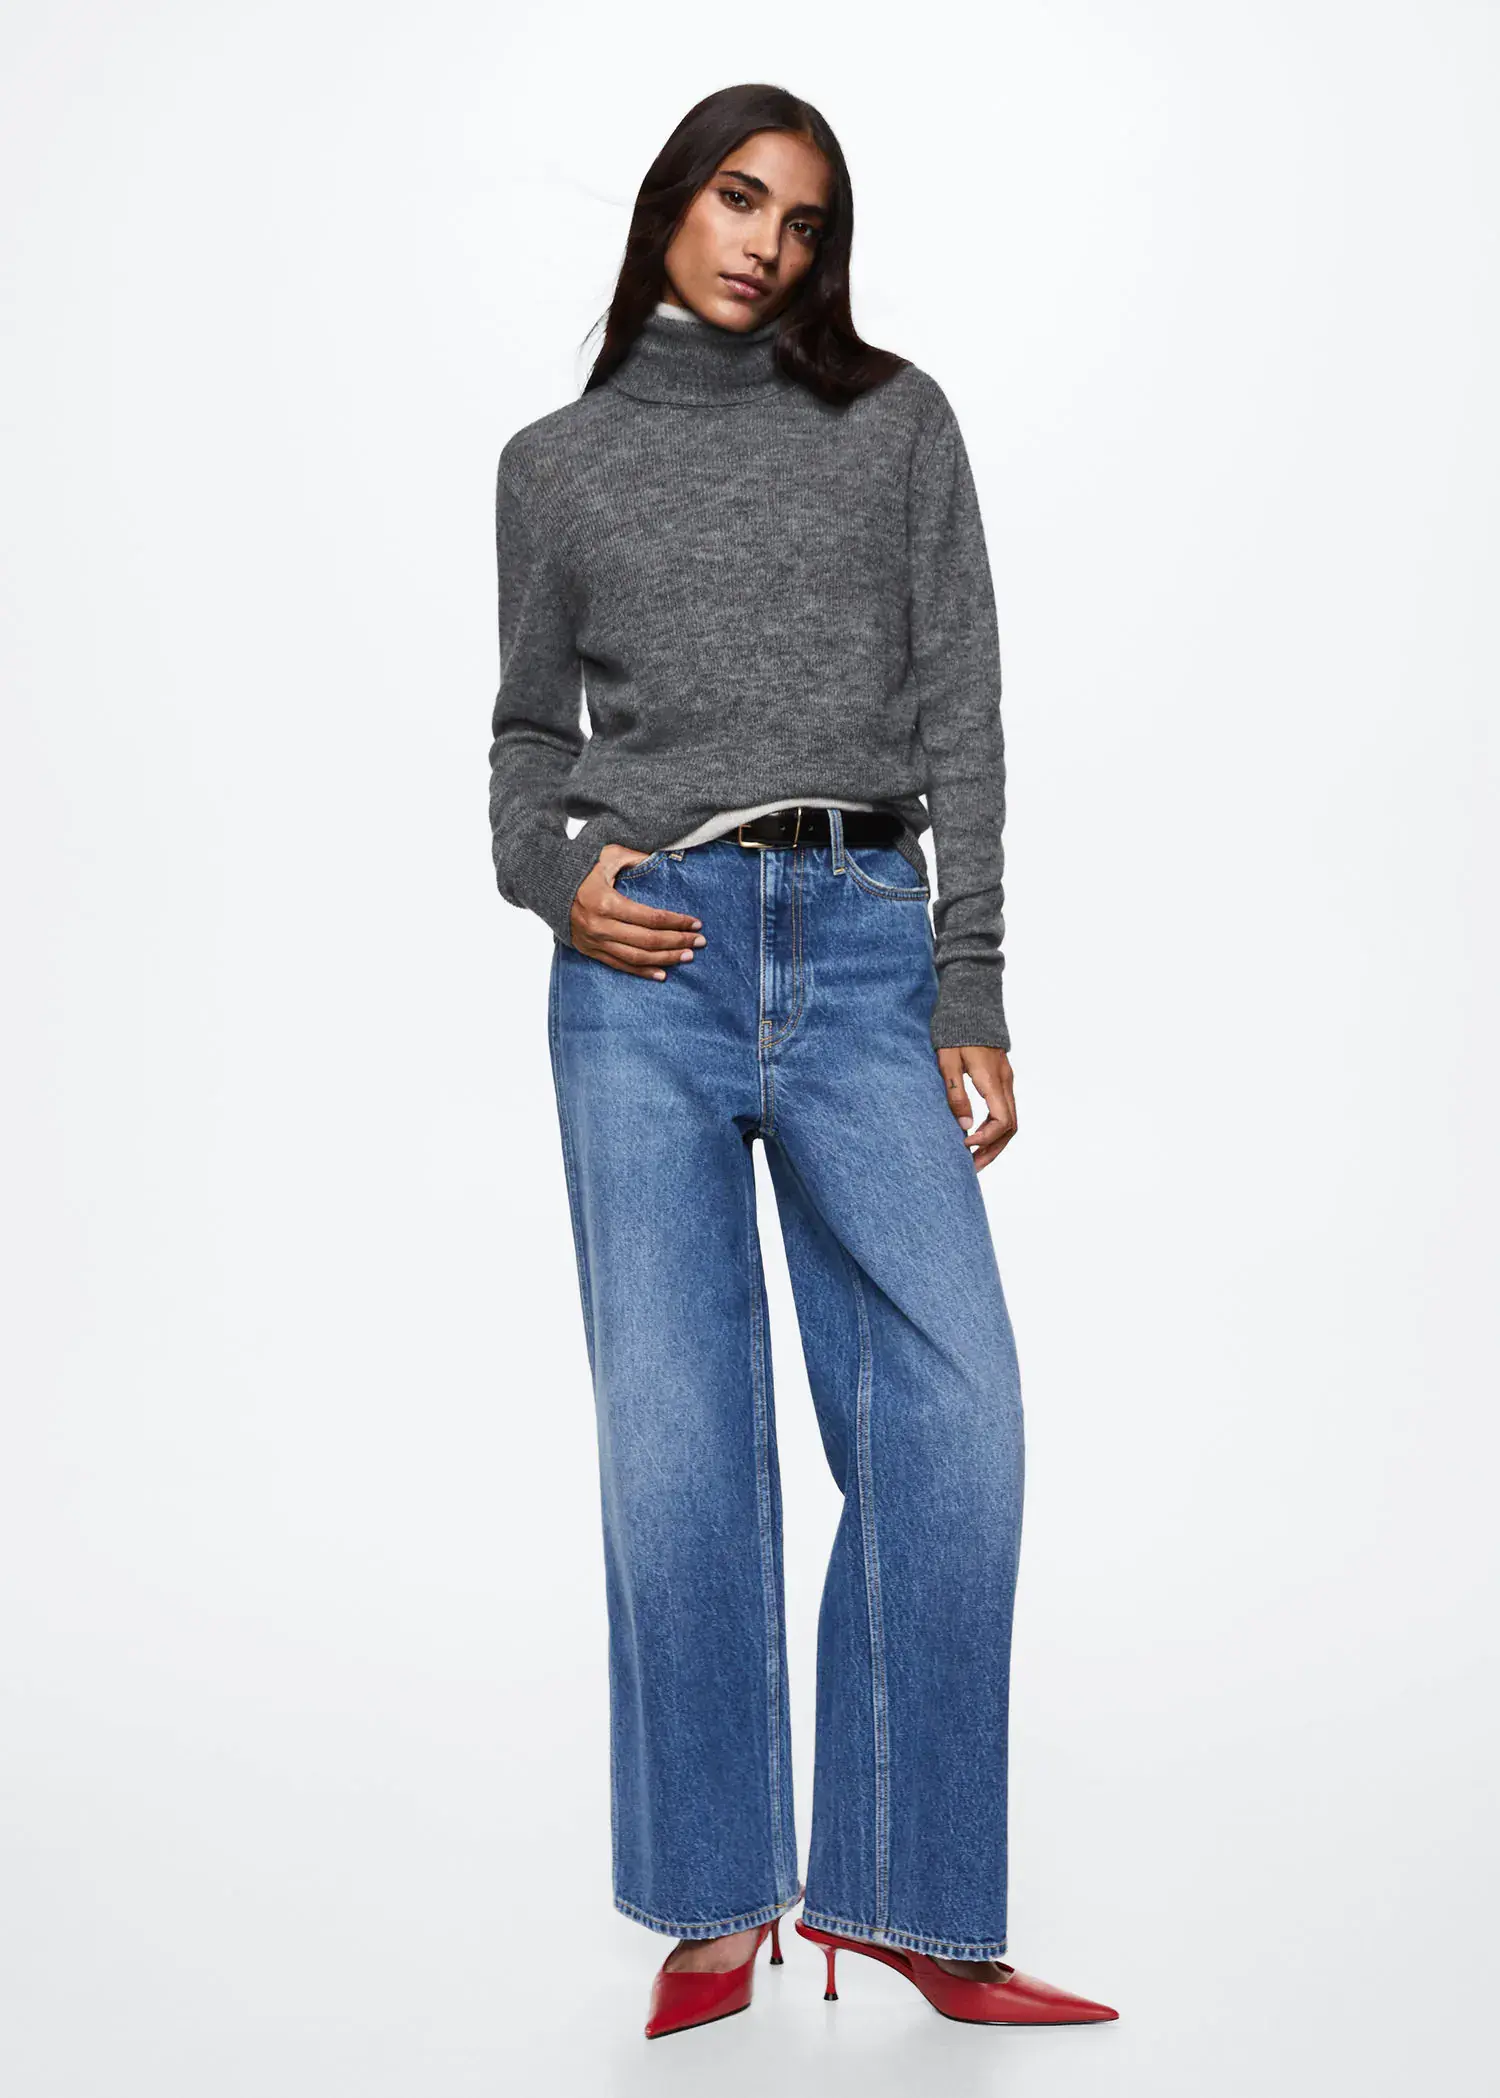 Mango Turtle neck sweater. a woman wearing a gray sweater and jeans. 